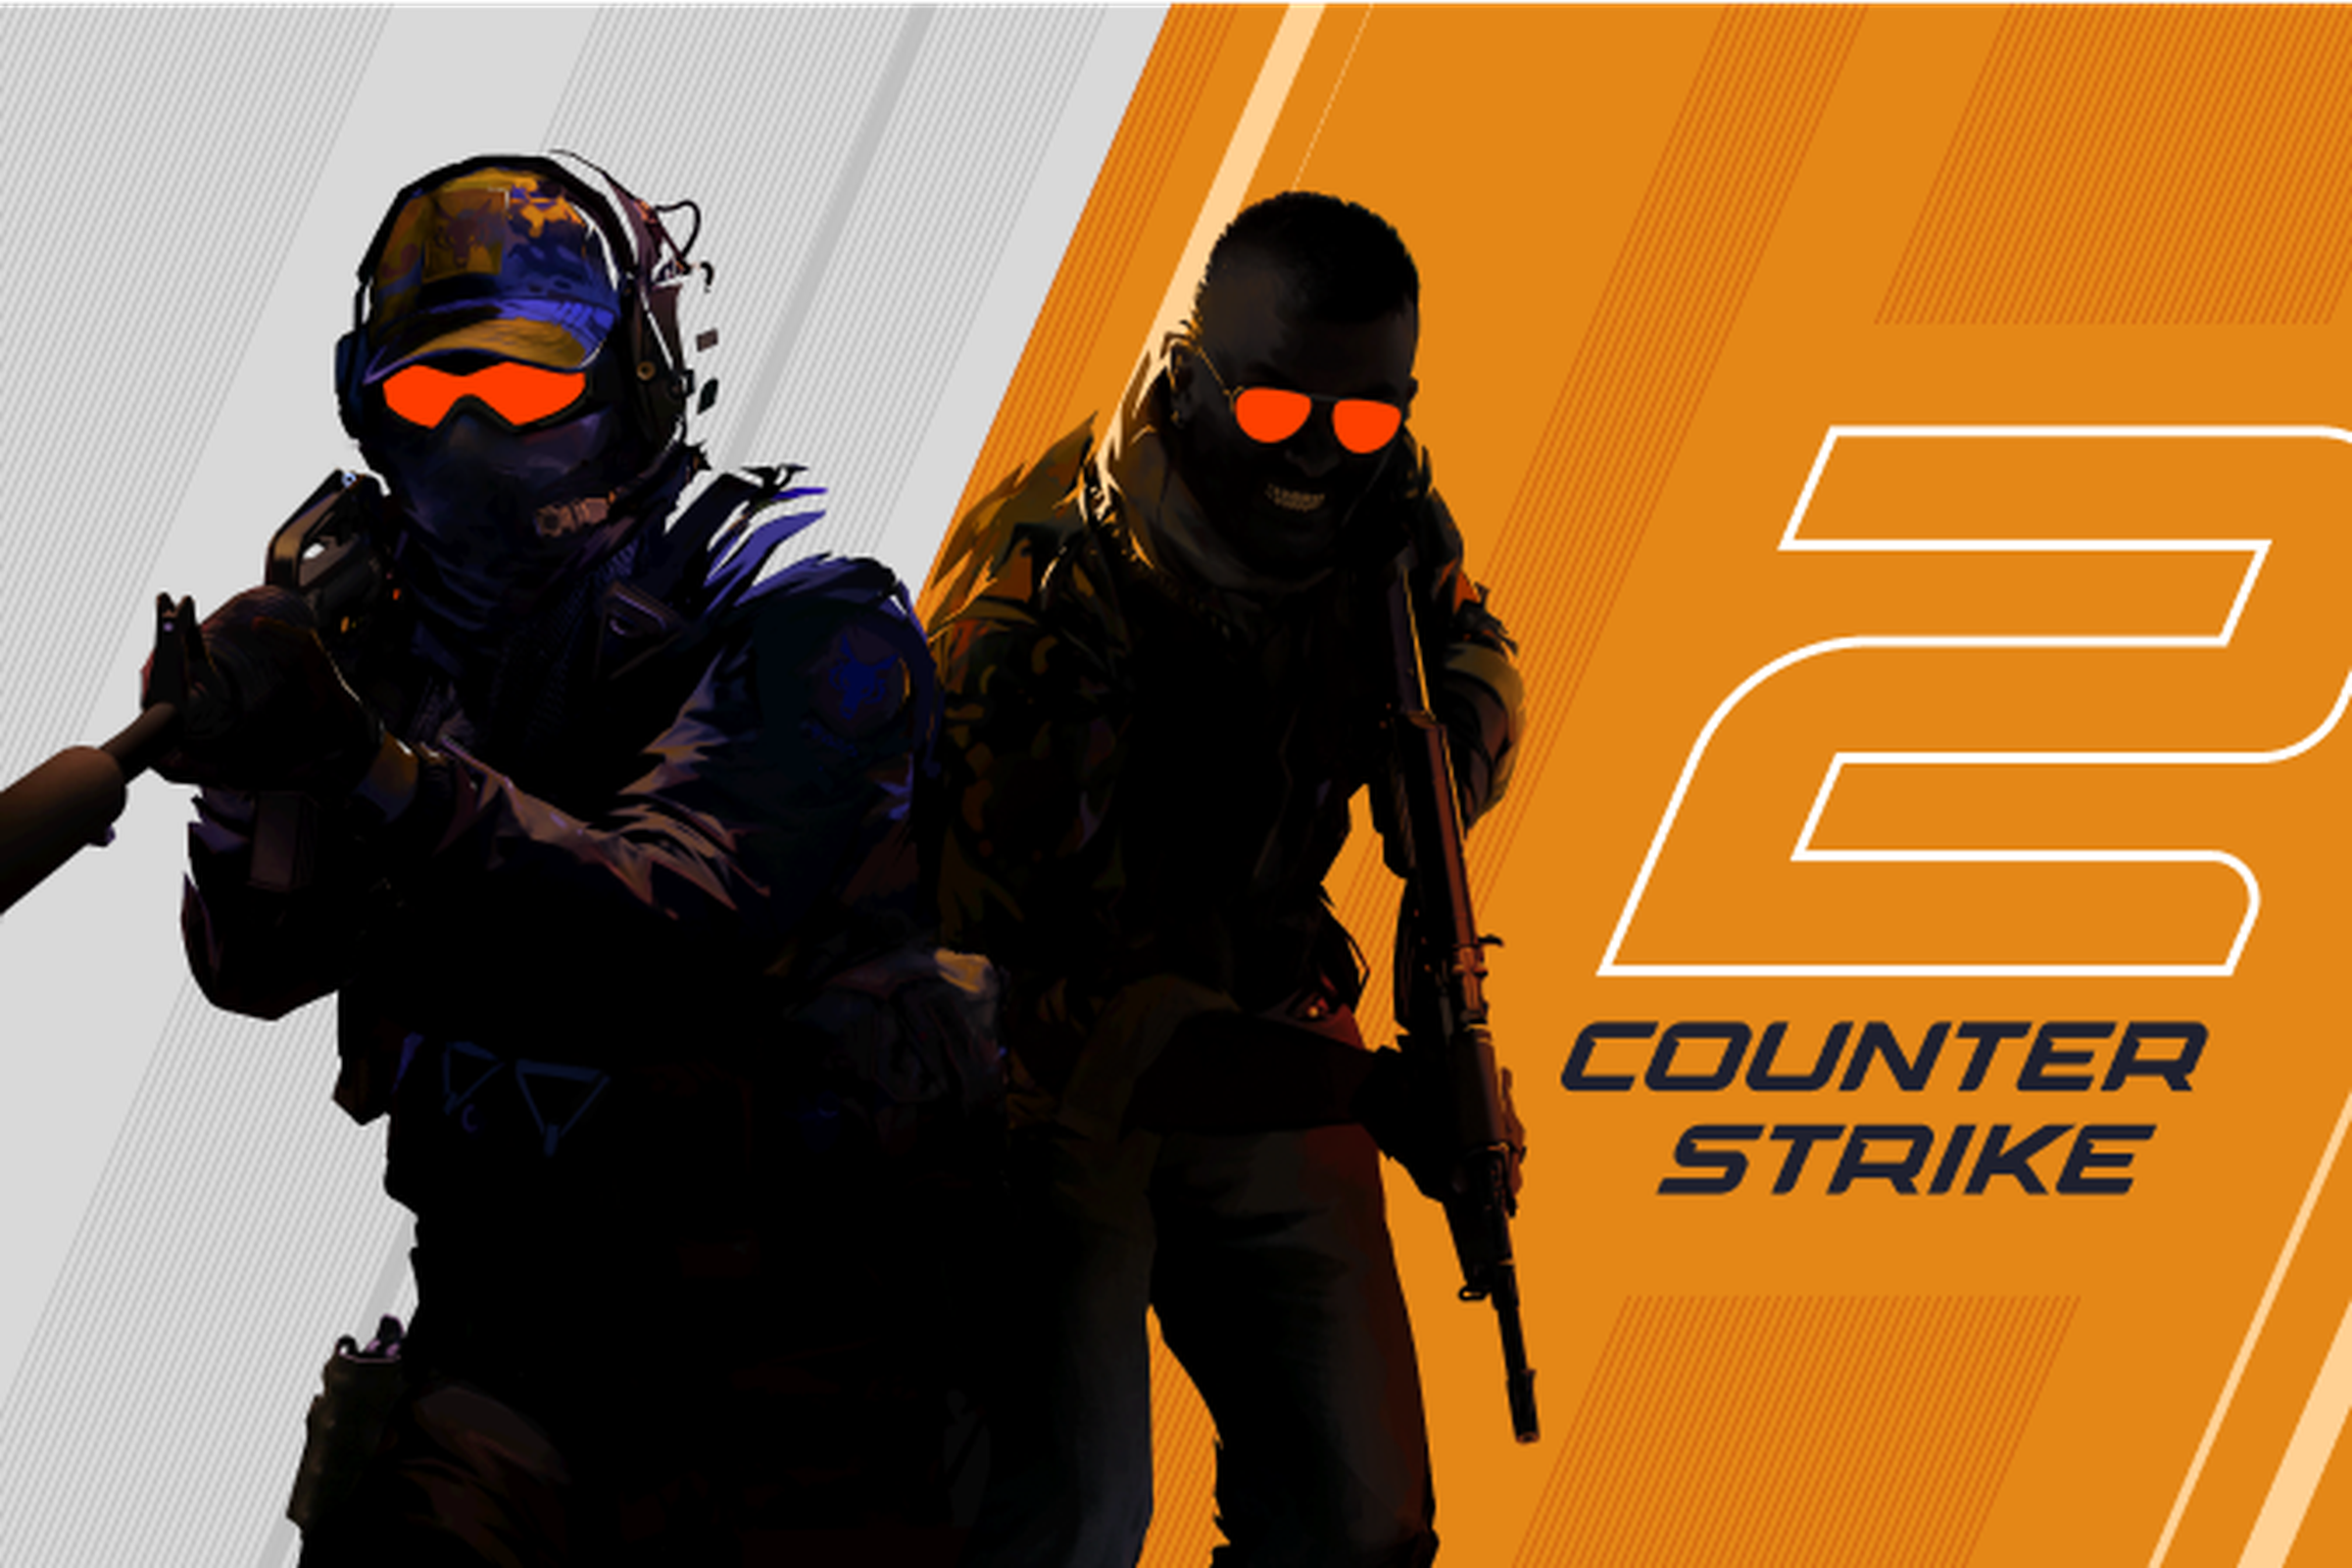 A promotional image for Counter-Strike 2.